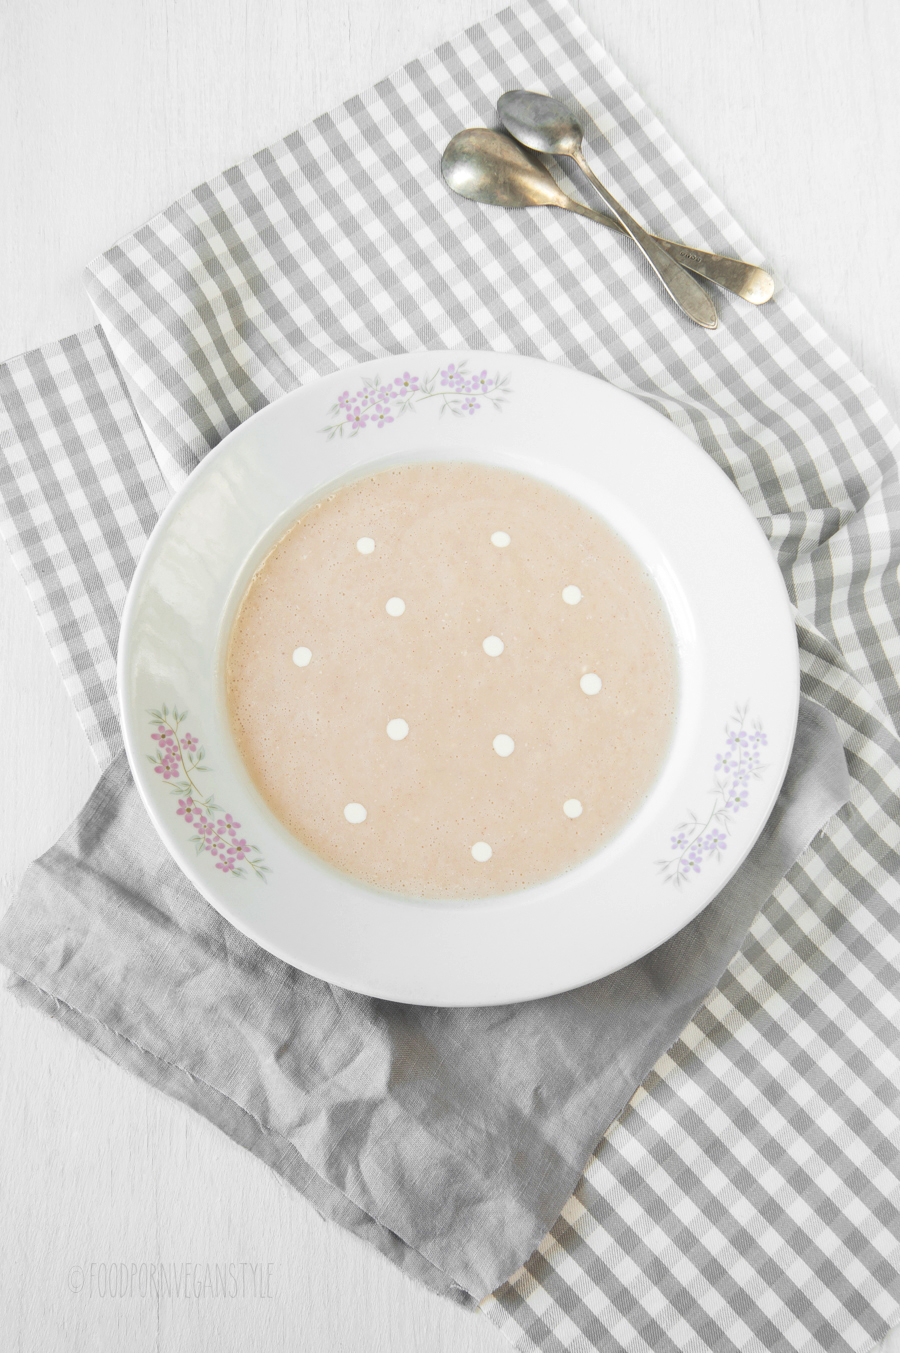 Sweet & creamy chilled rhubarb soup